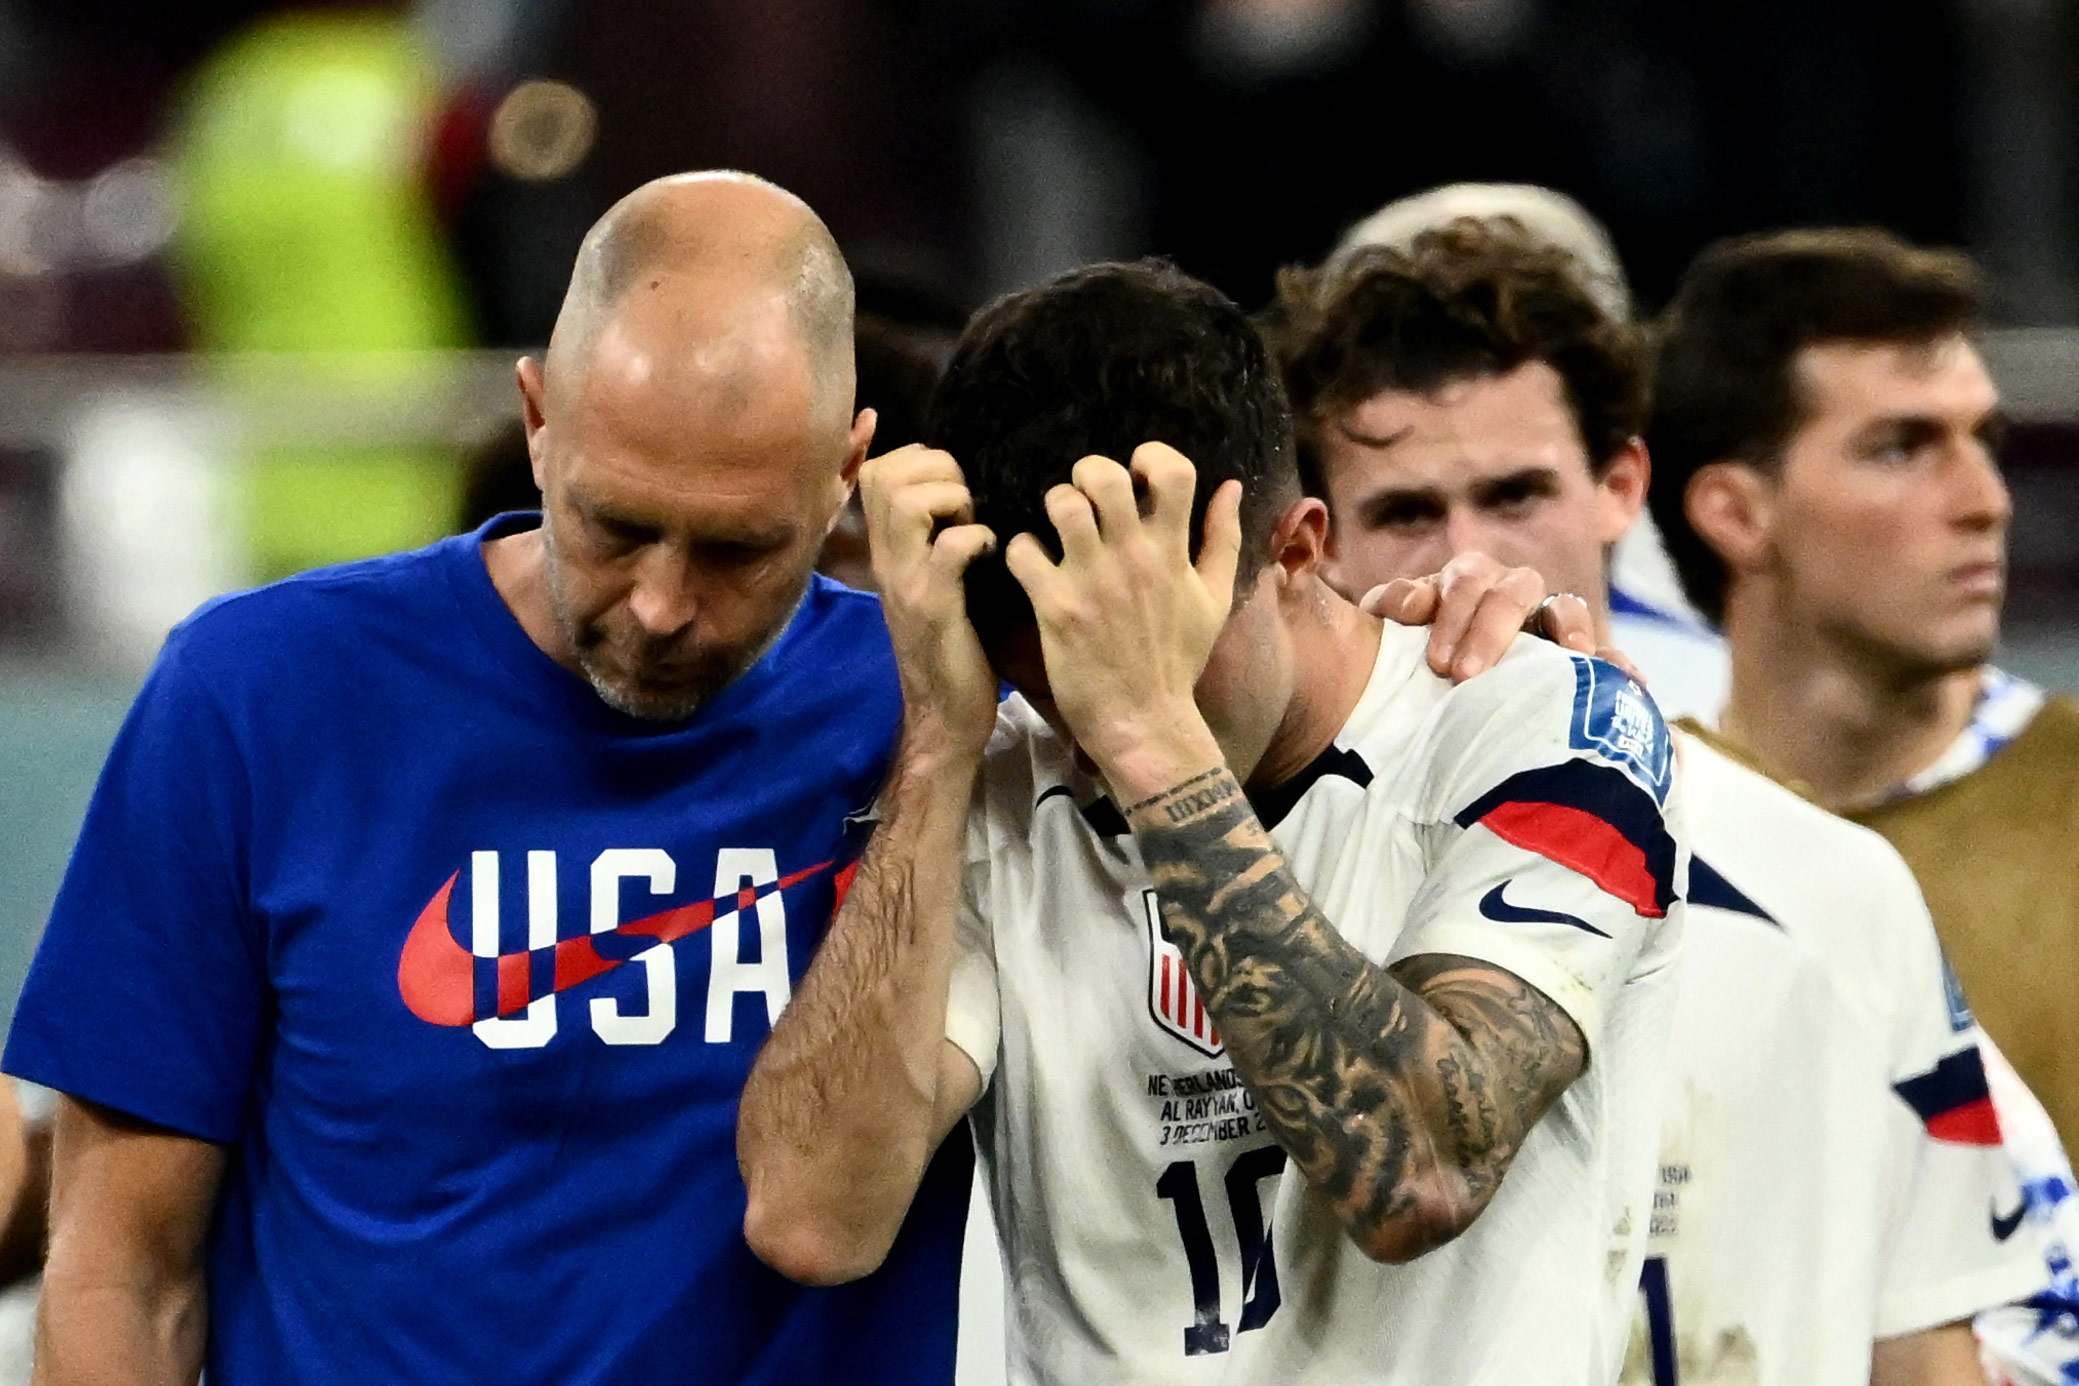 US coach says he is “really proud of this group but bitterly disappointed” after loss to Netherlands